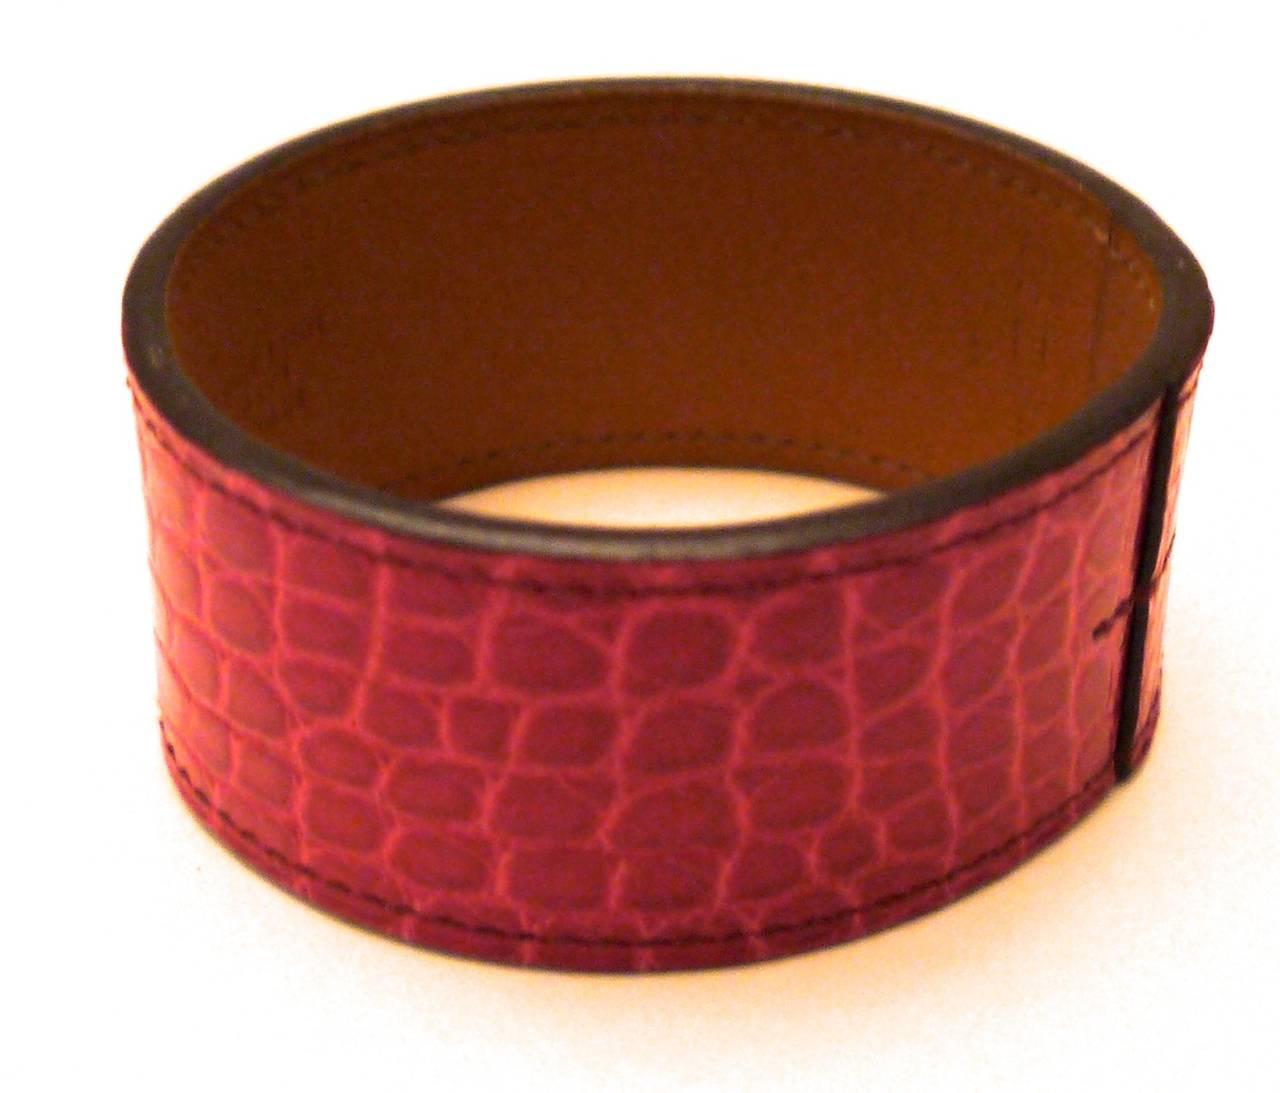 New Hermes alligator bracelet in fuchsia. This bracelet is a stunning addition to any ensemble and is a work of remarkable craftsmanship. The circumference of the inside of the bracelet is 8 inches. The diameter of the bracelet is 2.5 inches. The